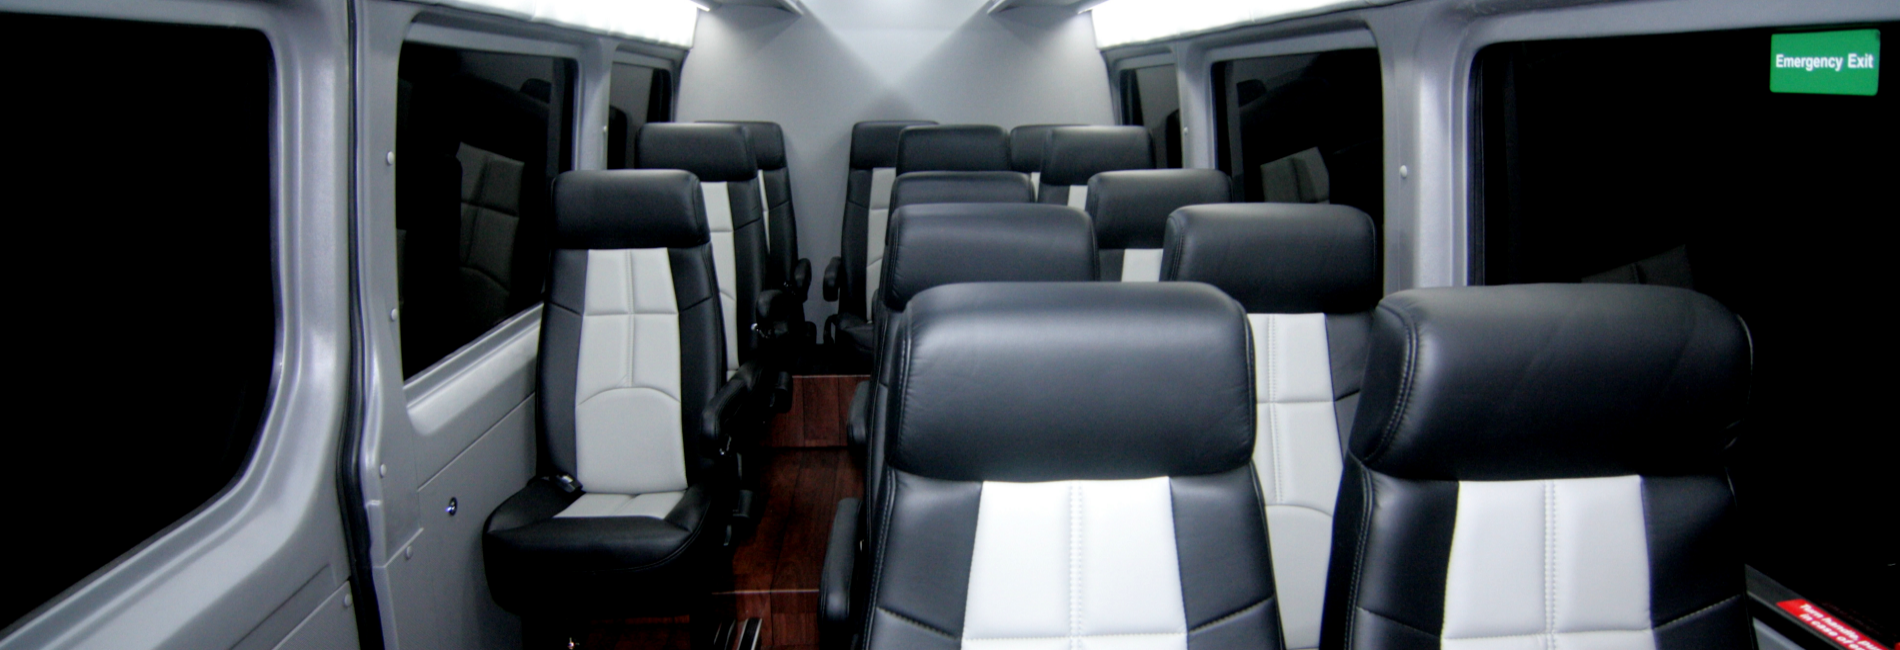 An efficient, reliable and affordable shuttle bus transportation solution.